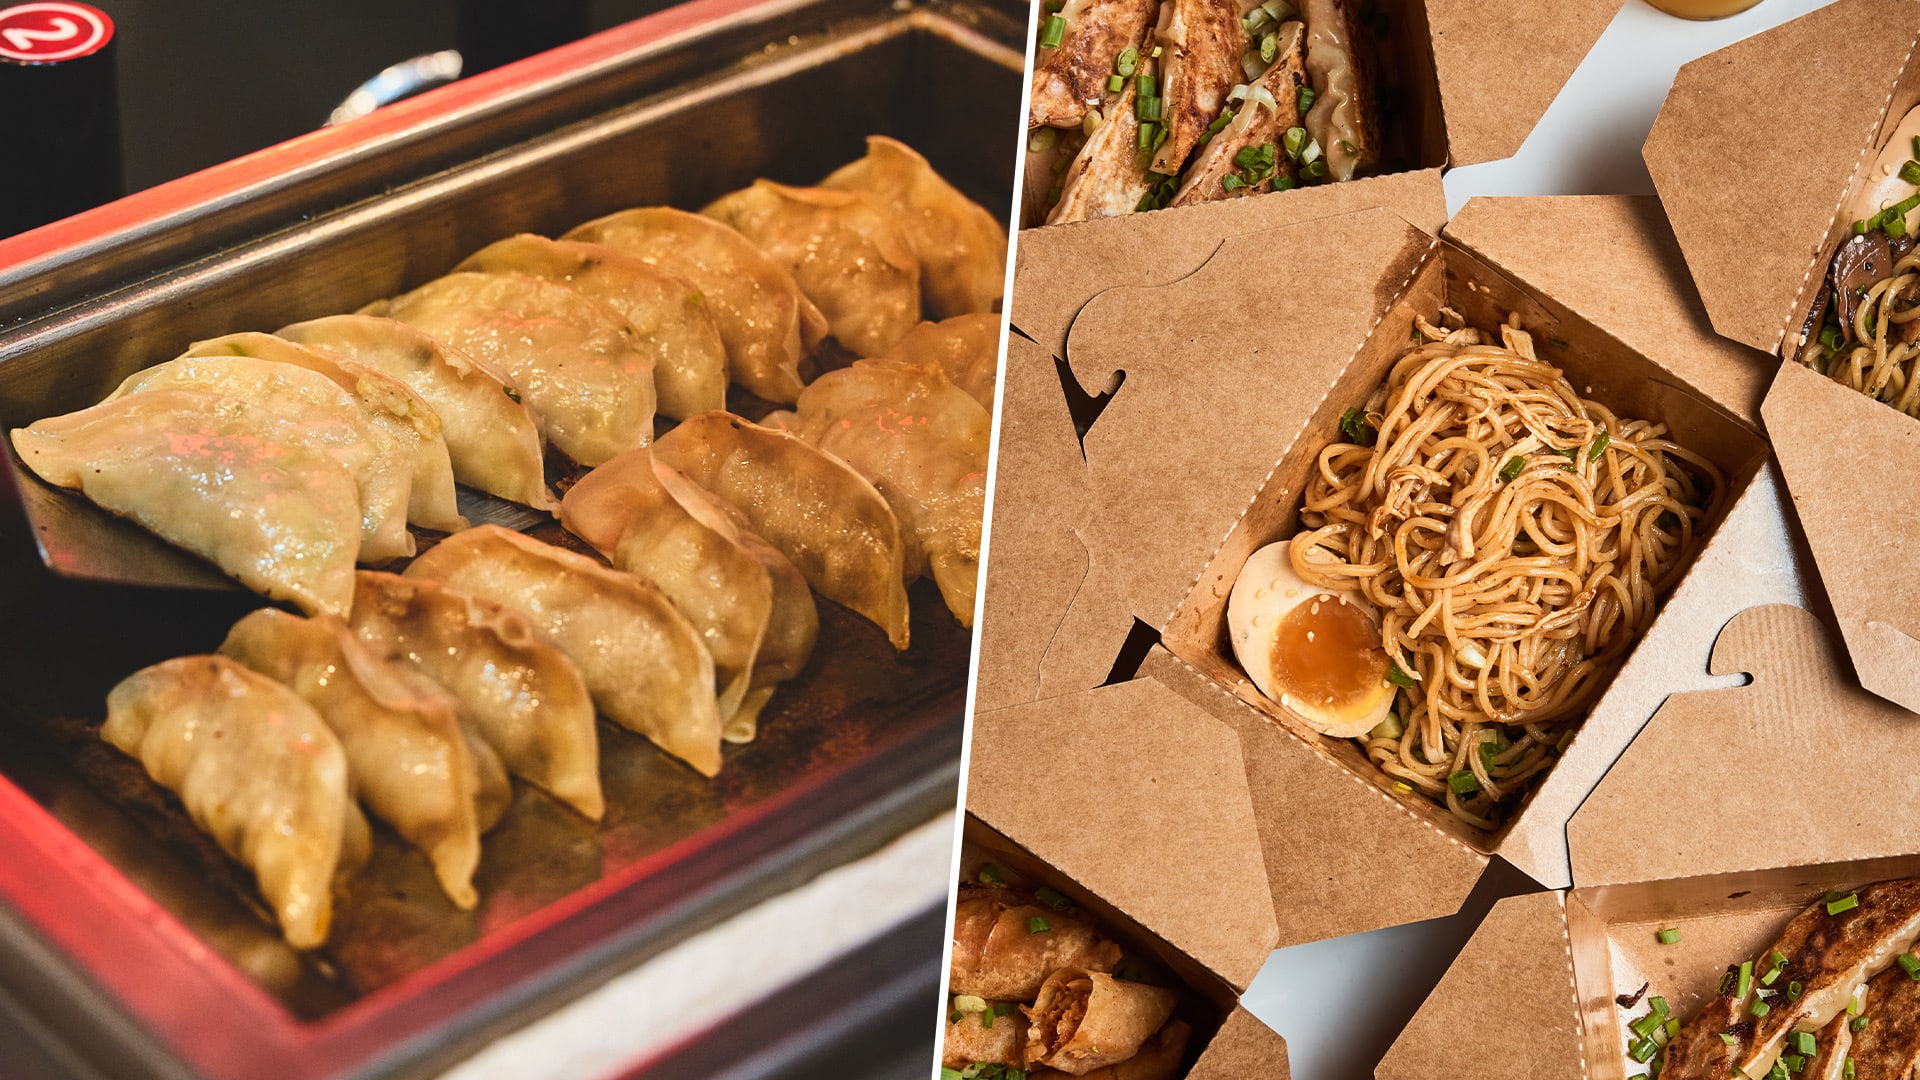 Dumpling Darlings Owners Open Hip Orchard Rd Spin-Off Brand With Cheaper Dumplings & Noodles